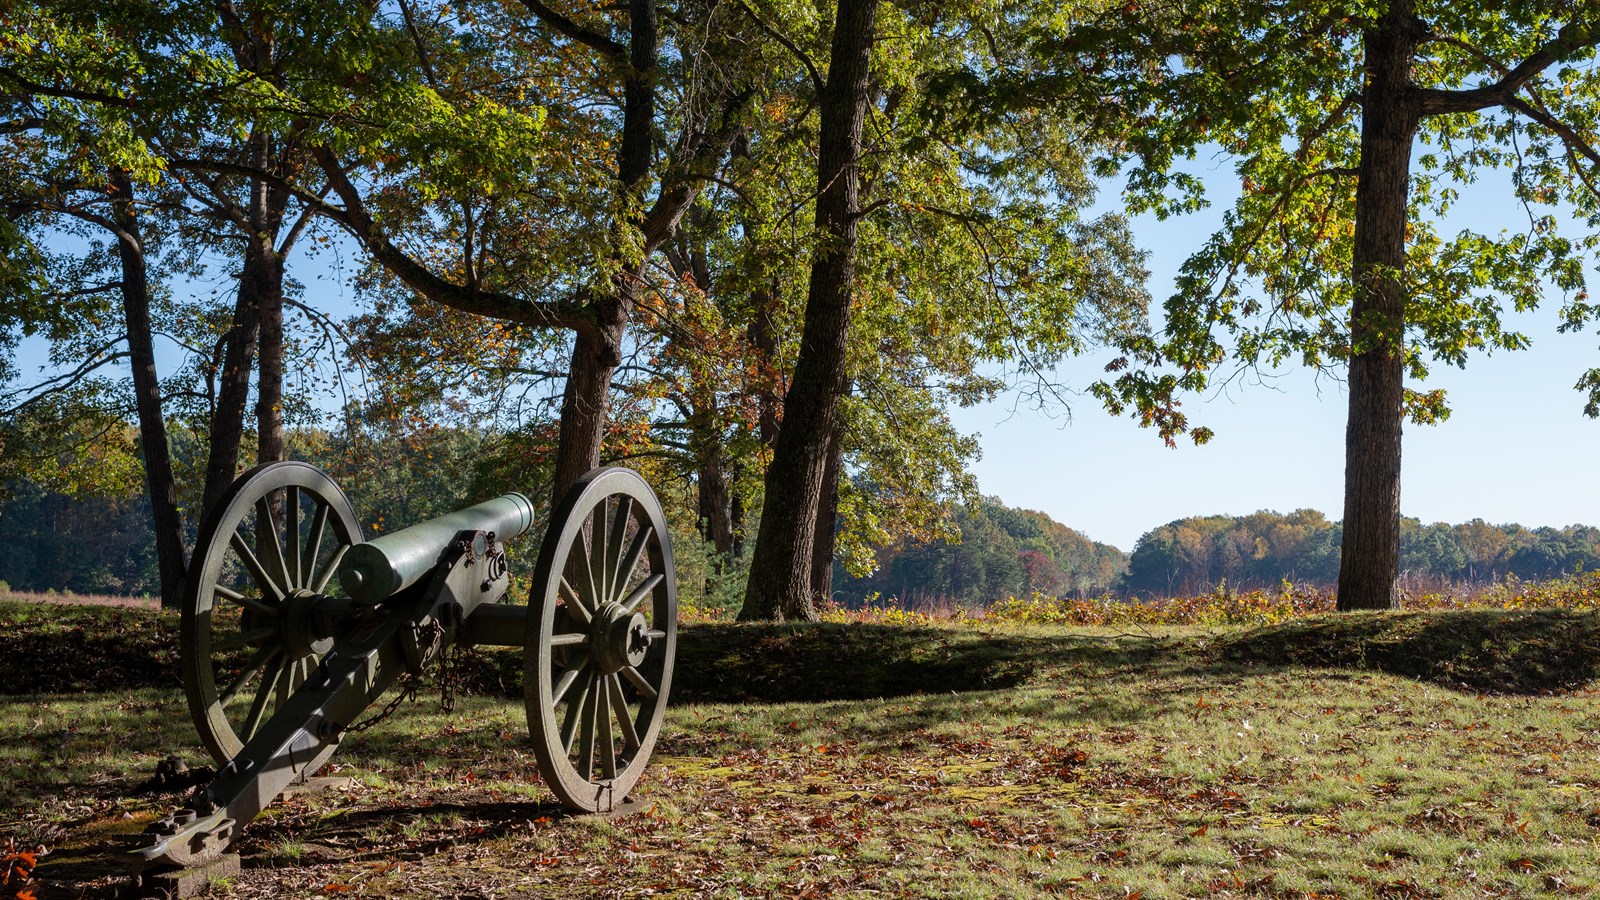 A cannon perched on a knoll overlooking a wide open field.